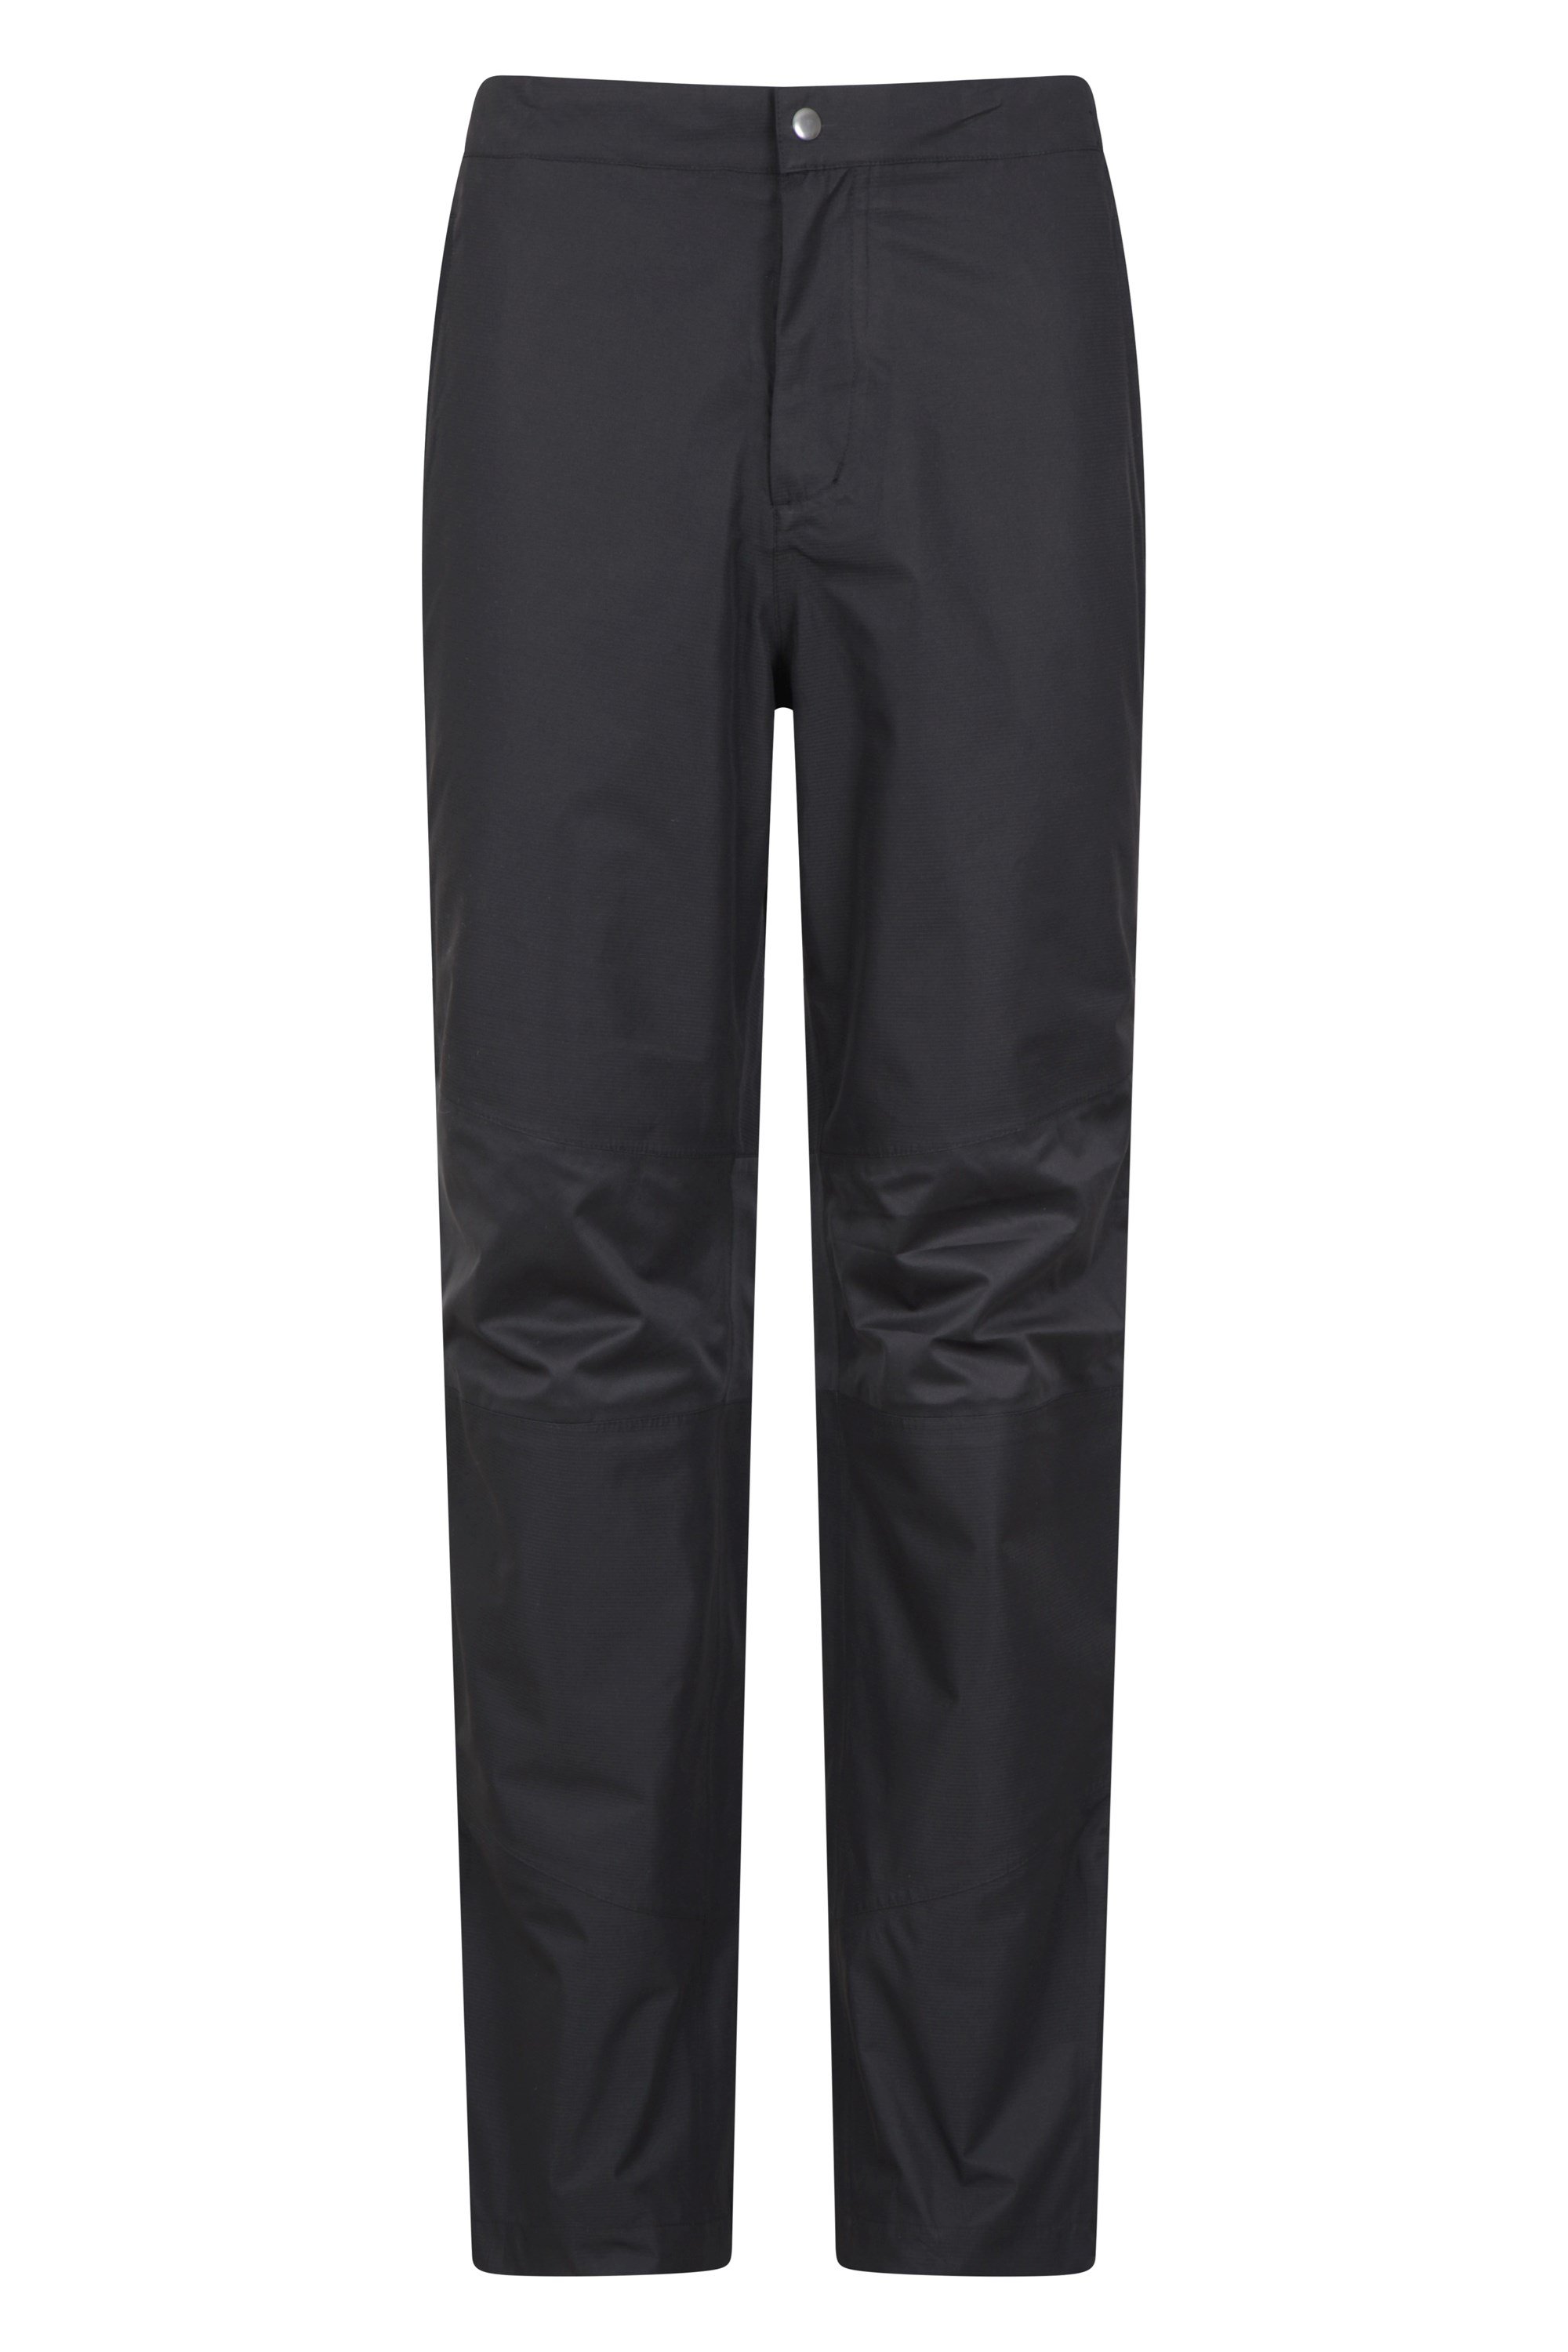 Nightvision Men's Waterproof Cycling Overtrousers – Altura